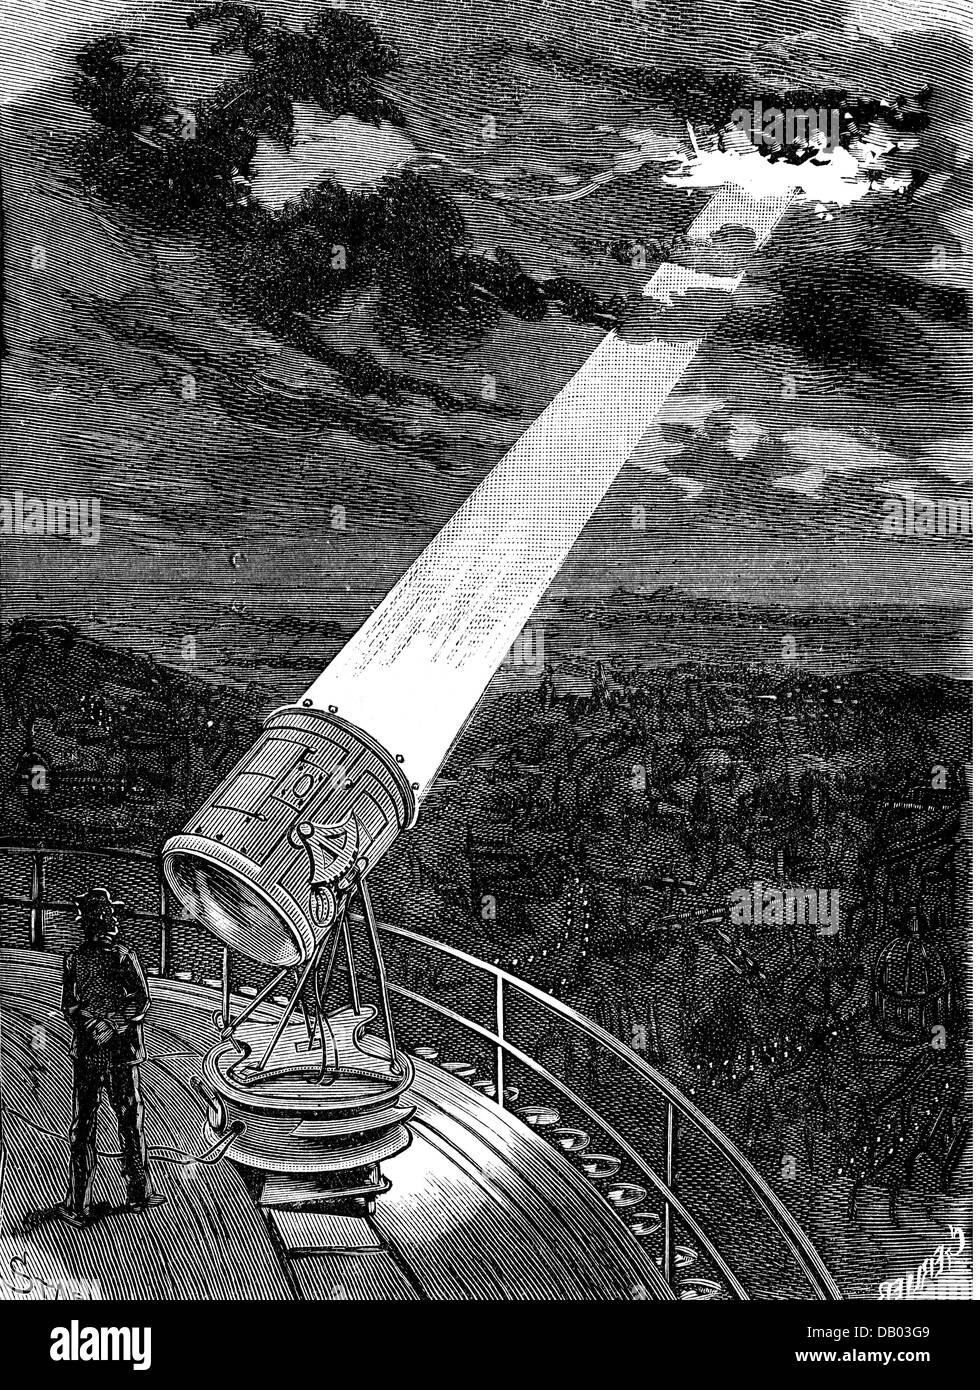 energy, electricity, light, a searchlight, developed by the French military officer Mangin and mounted on the Eiffel tower, illuminating a cloud, wood engraving, late 19th century, electrical, electric, searchlight, searchlights, beam of light, light ray, beams of light, light rays, Paris, France, illumination, illuminations, clouds, cloud, invention, inventions, technics, historic, historical, Additional-Rights-Clearences-Not Available Stock Photo